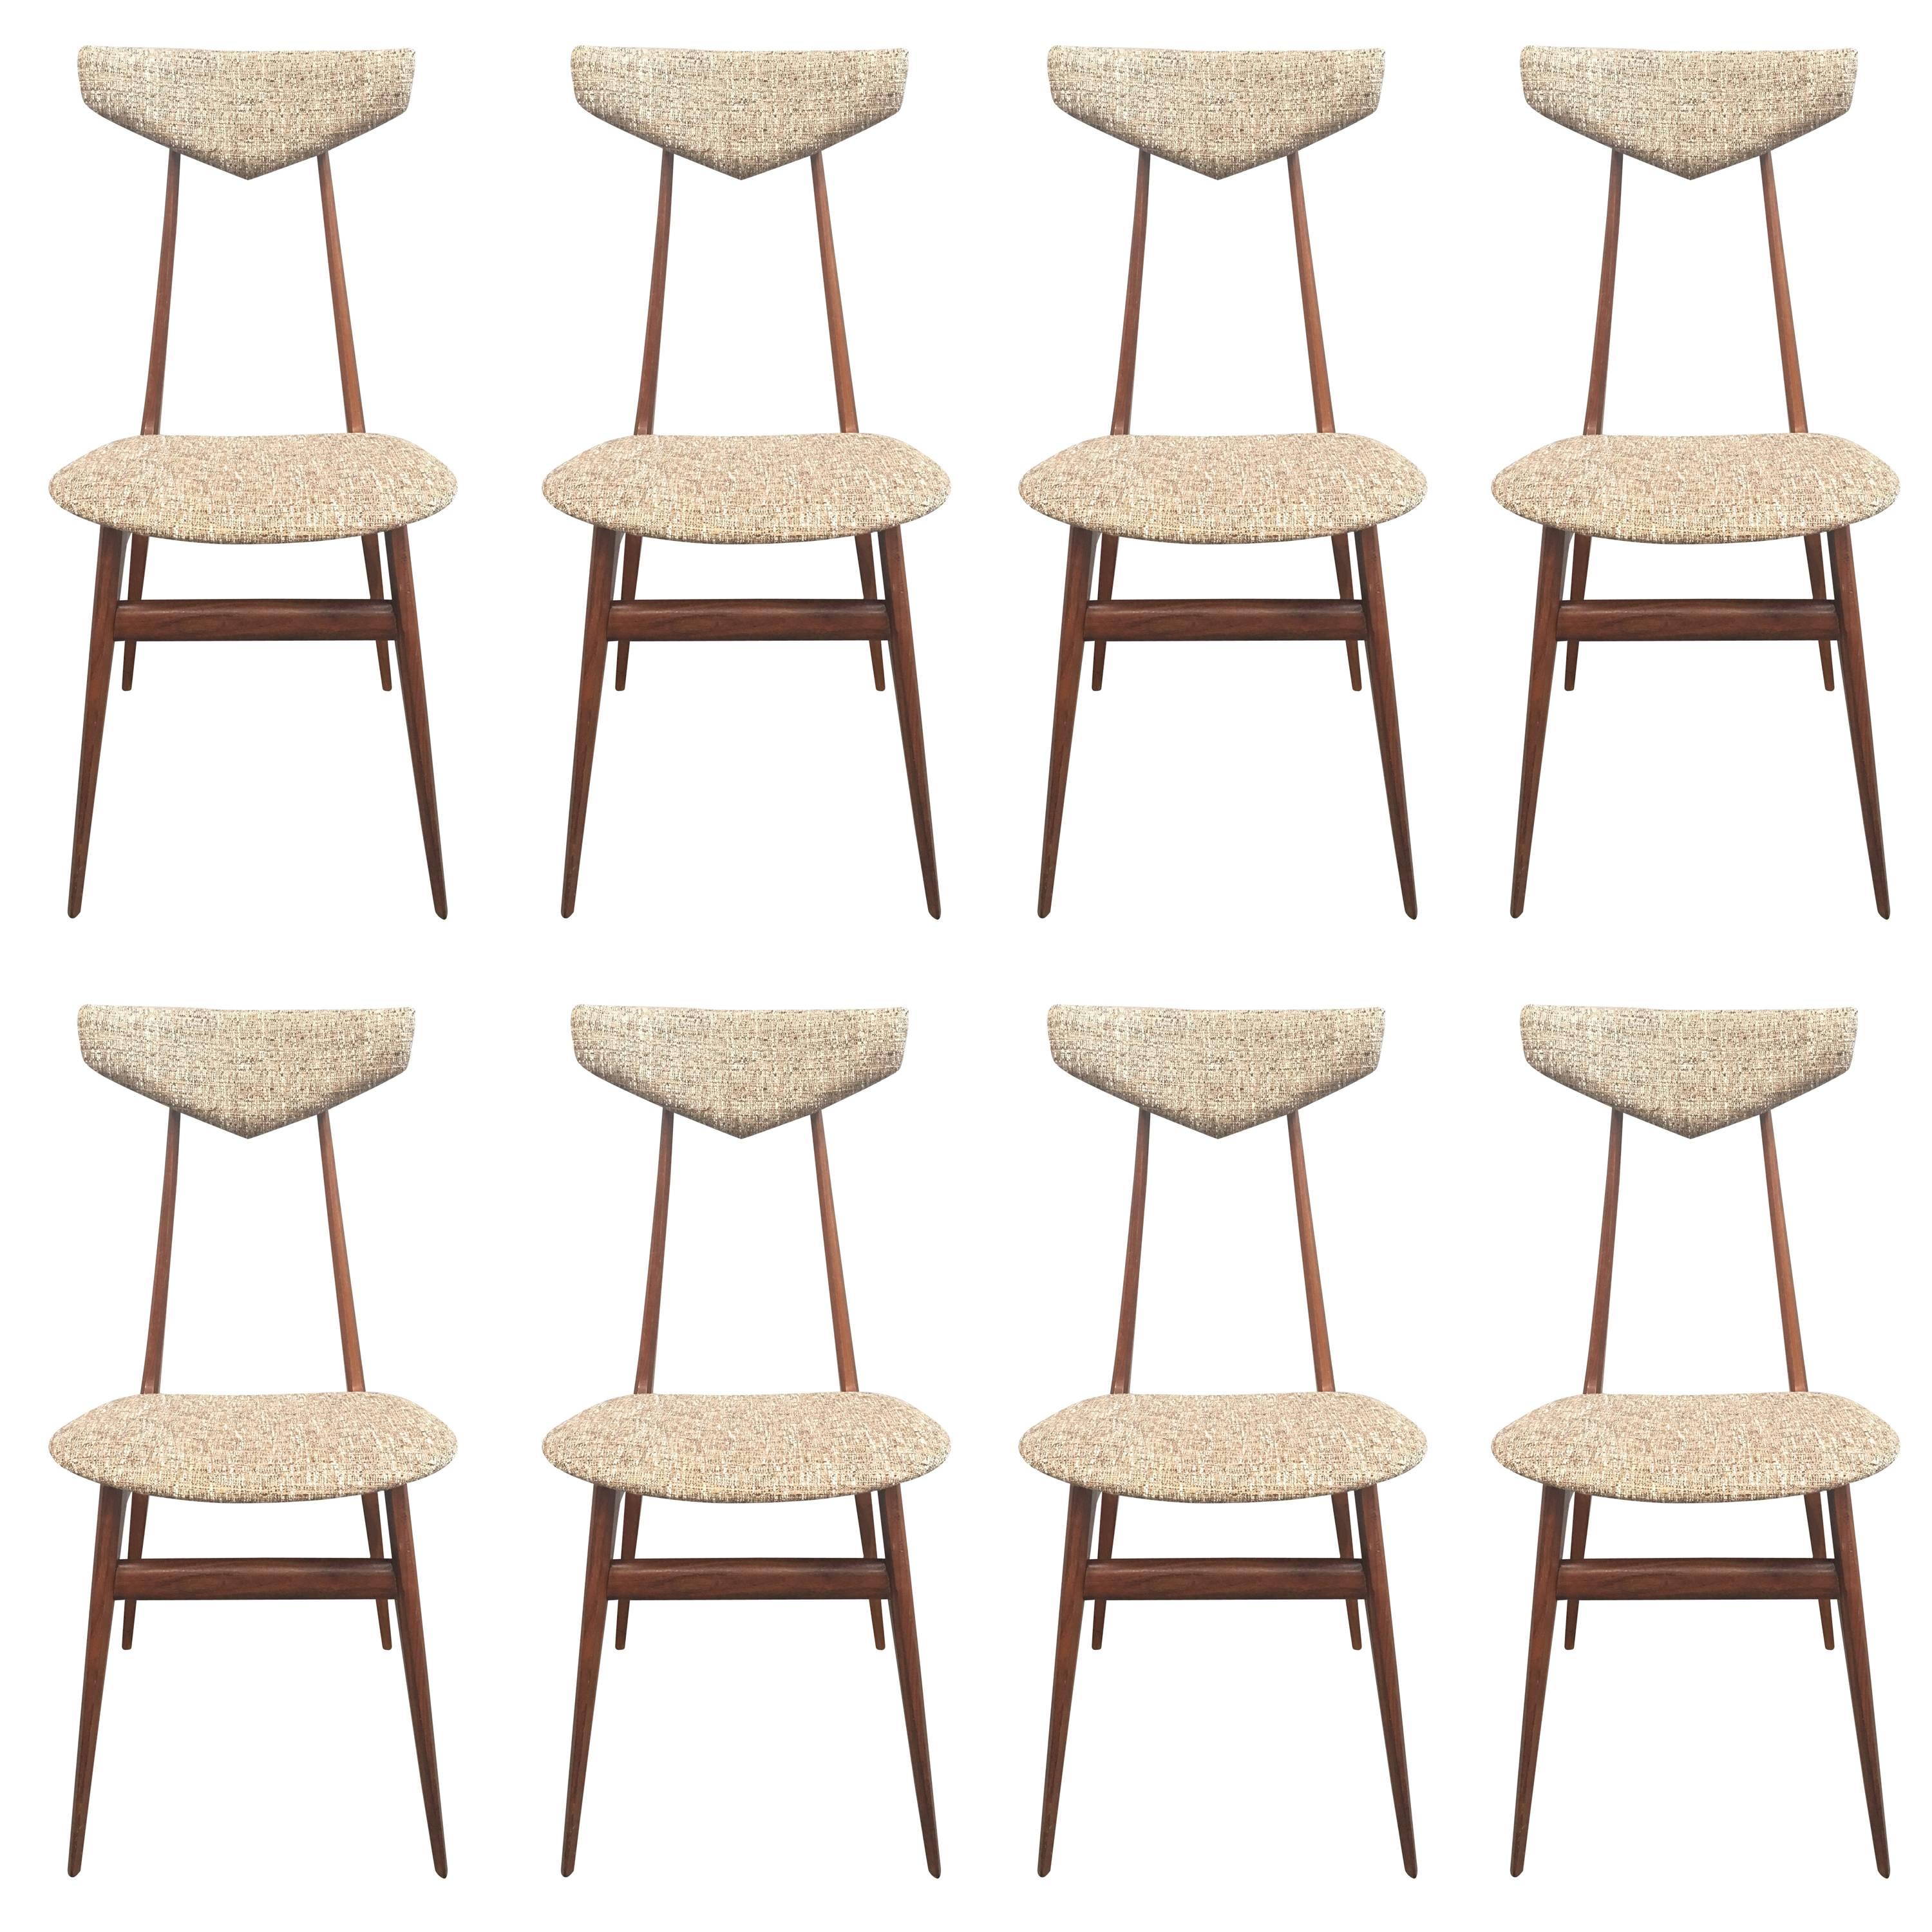 Rare Set of Eight Chairs Attributed to Ico Parisi